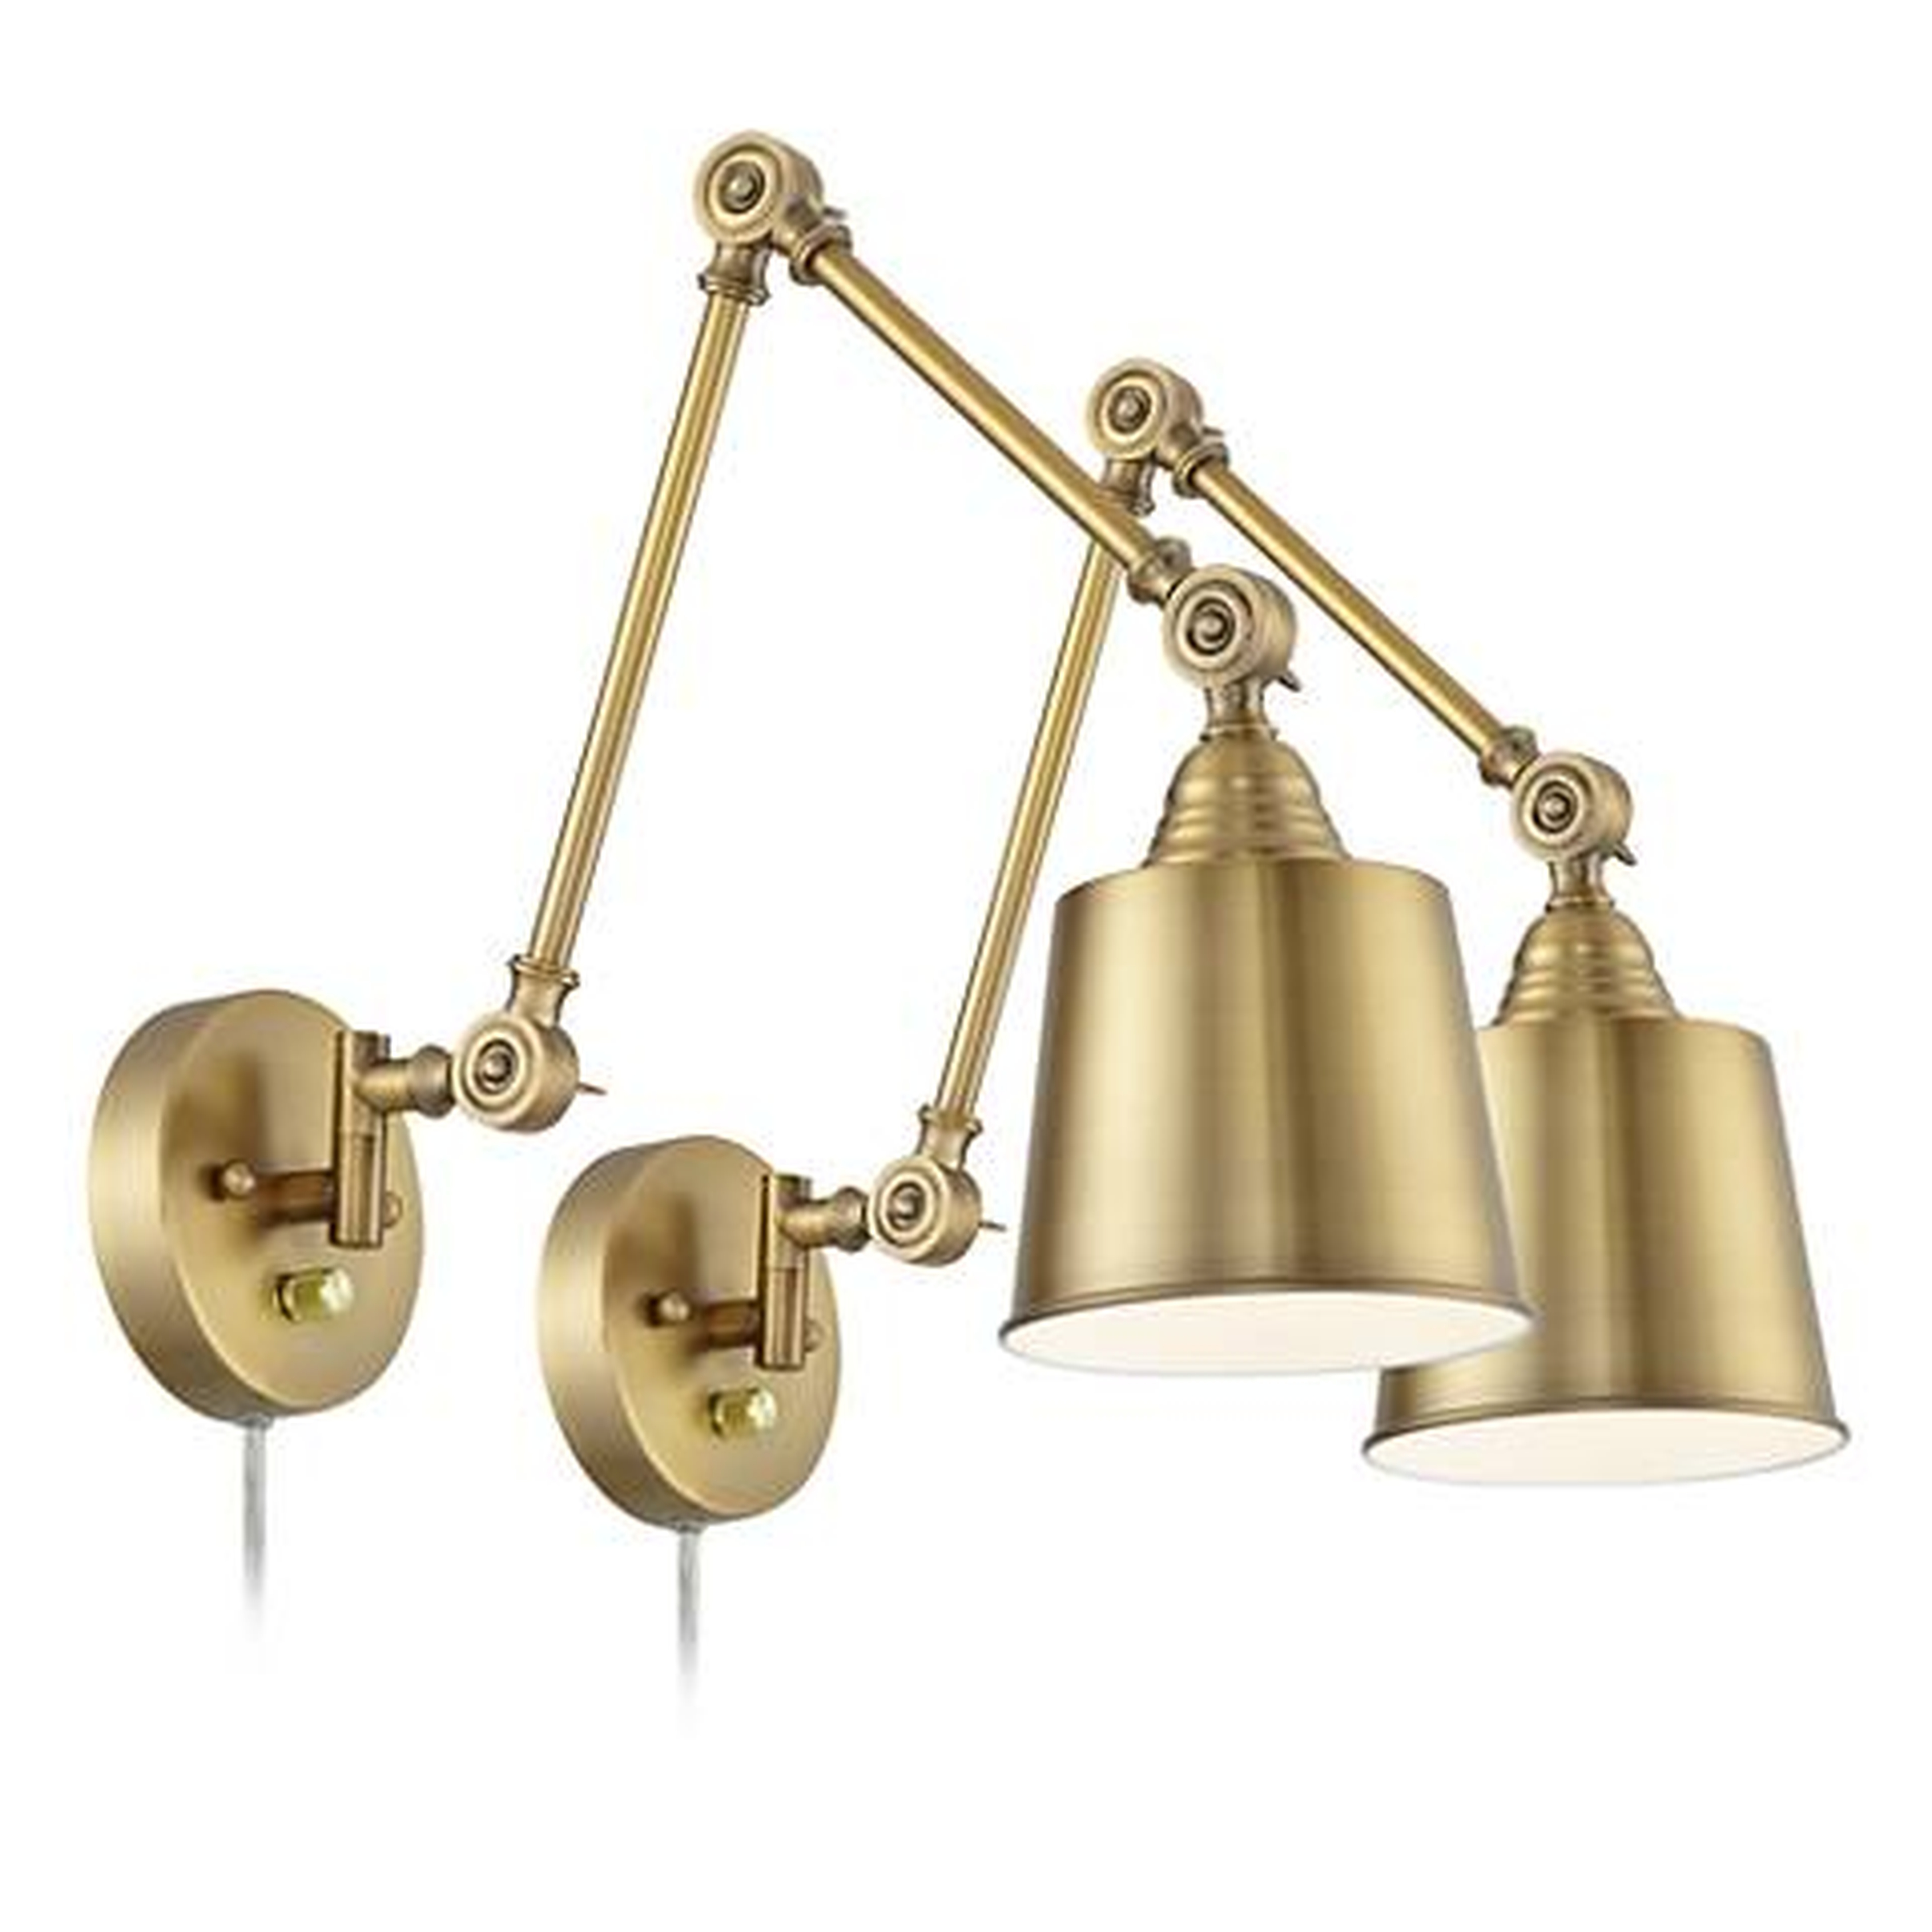 Set of 2 Mendes Antique Brass Down-Light Plug-In Wall Lamps - Style # 23R80 - Lamps Plus